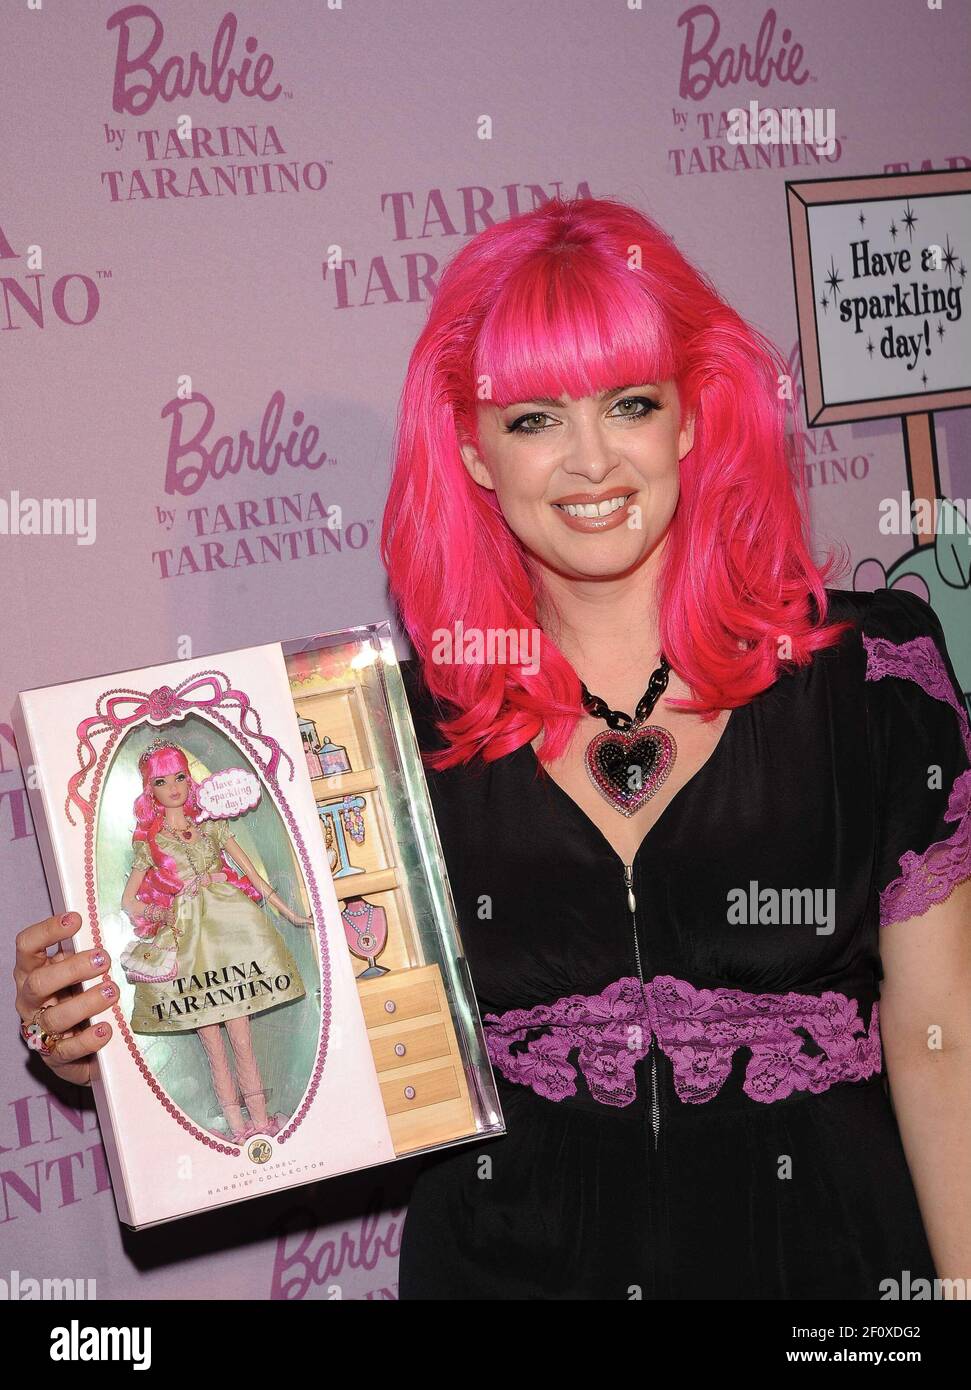 Tarina Tarantino. 17 July 2008 - Los Angeles, California. The Pink Plastic  Party of the Year to celebrate the launch of The Tarina Tarantino Barbie  doll and jewelry collection. Photo Credit: Giulio